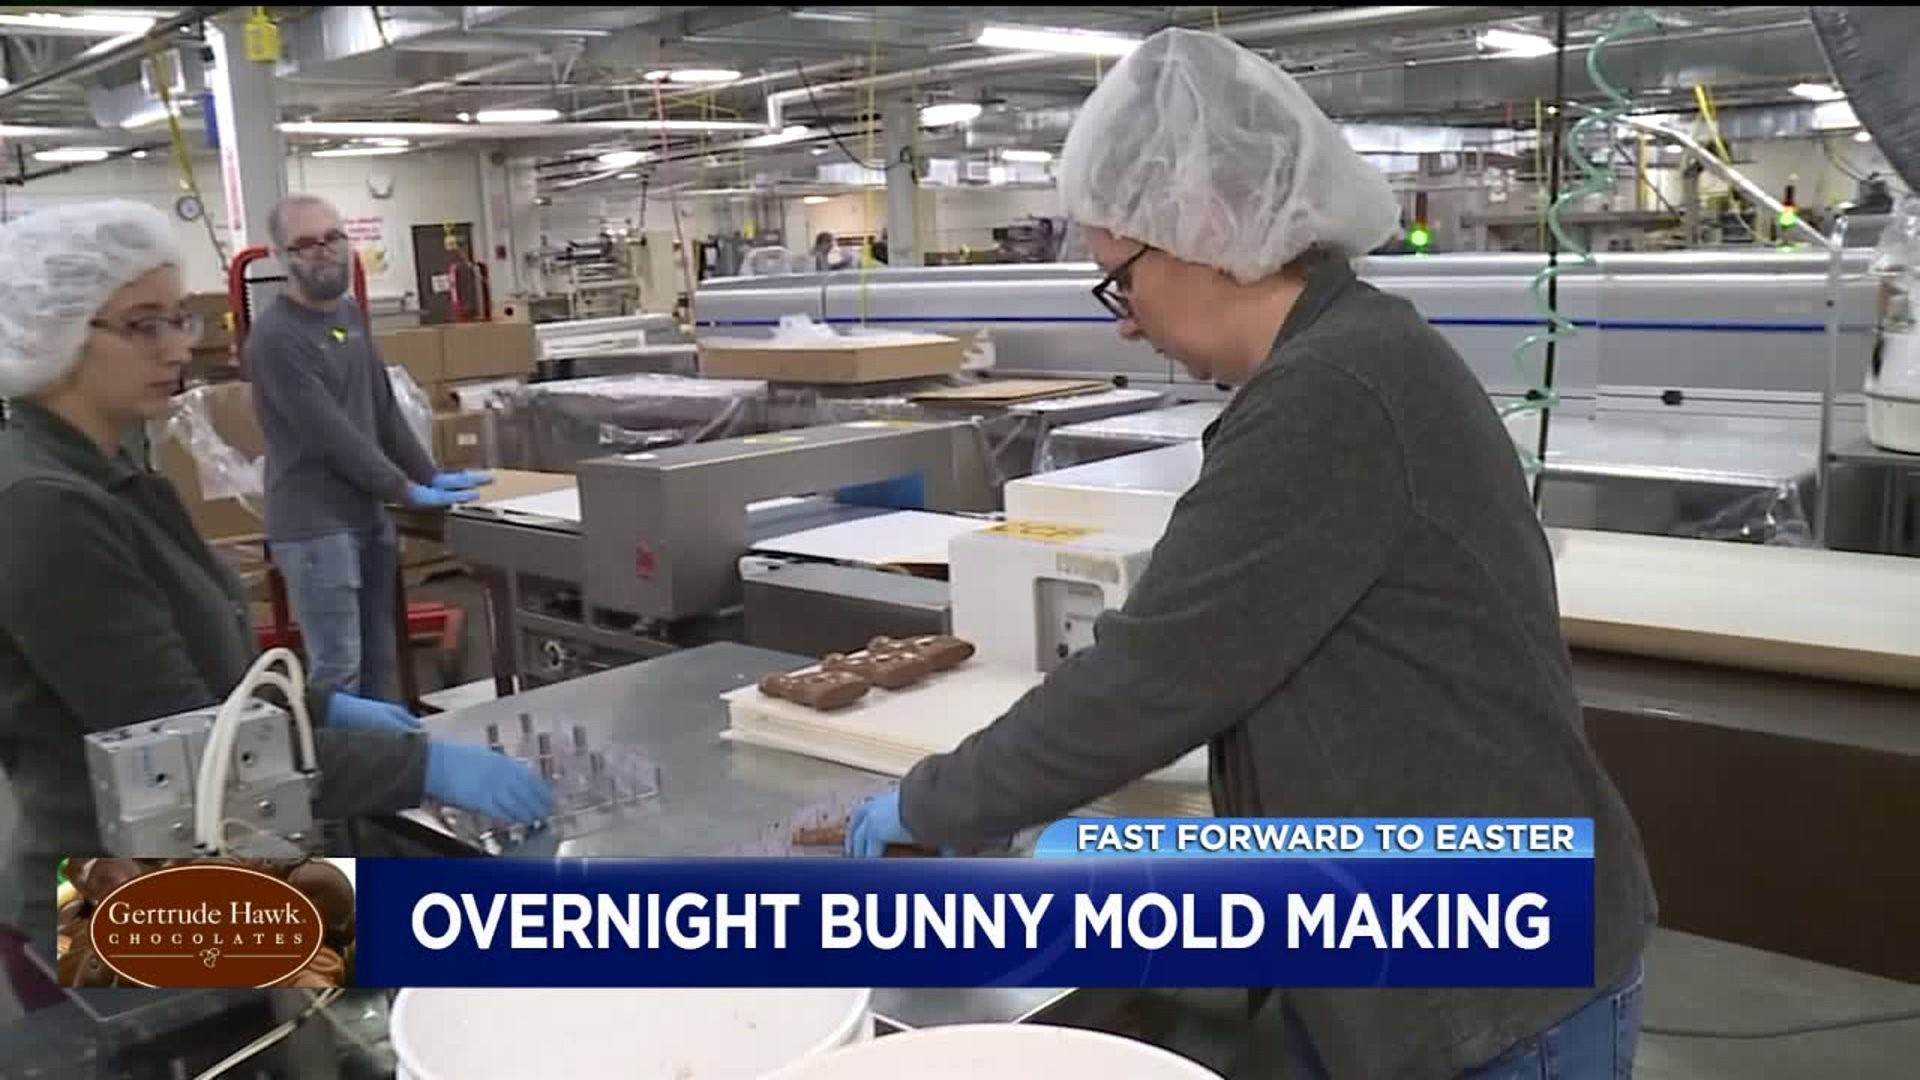 Overnight Bunny Mold Making for Easter